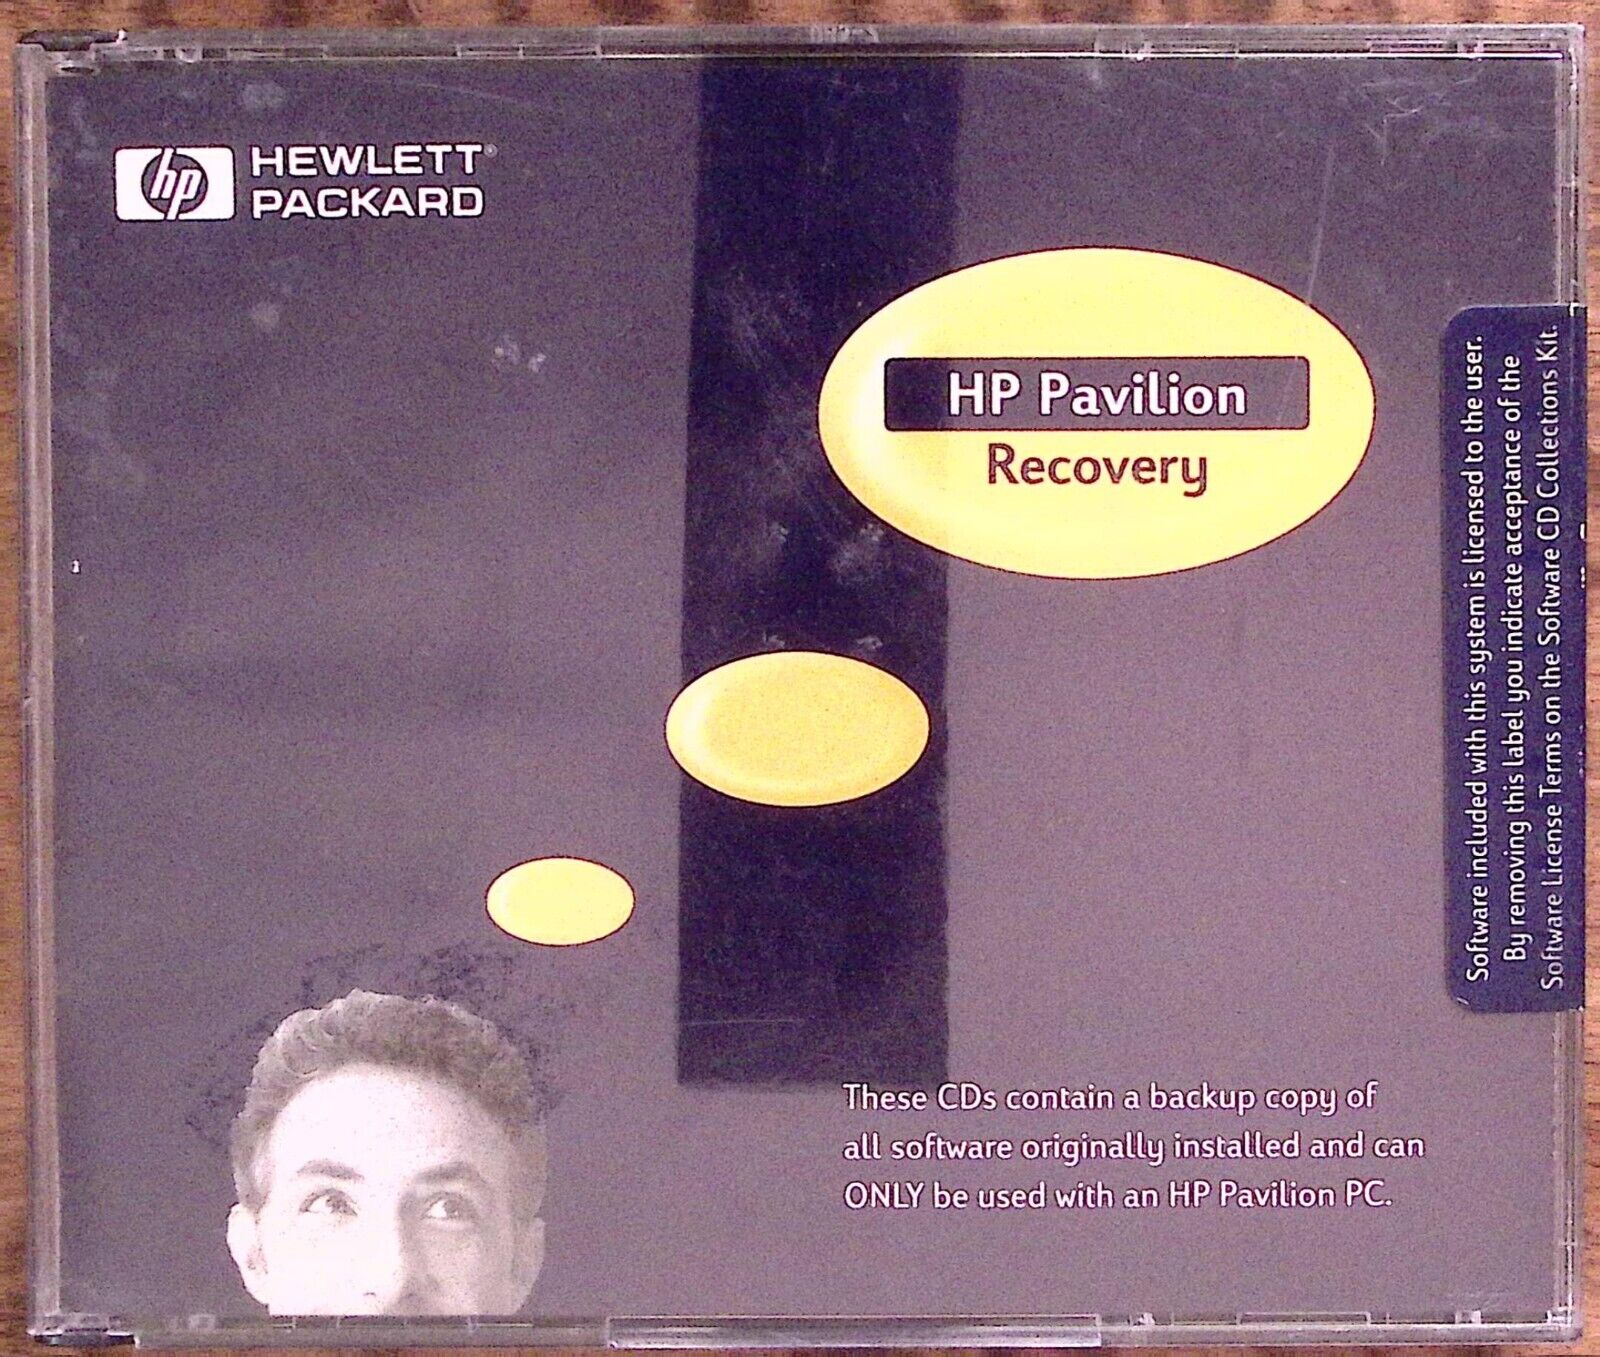 HP PAVILION RECOVERY PC SOFTWARE VINTAGE HP 2000  3-DISC SET  CD 2781